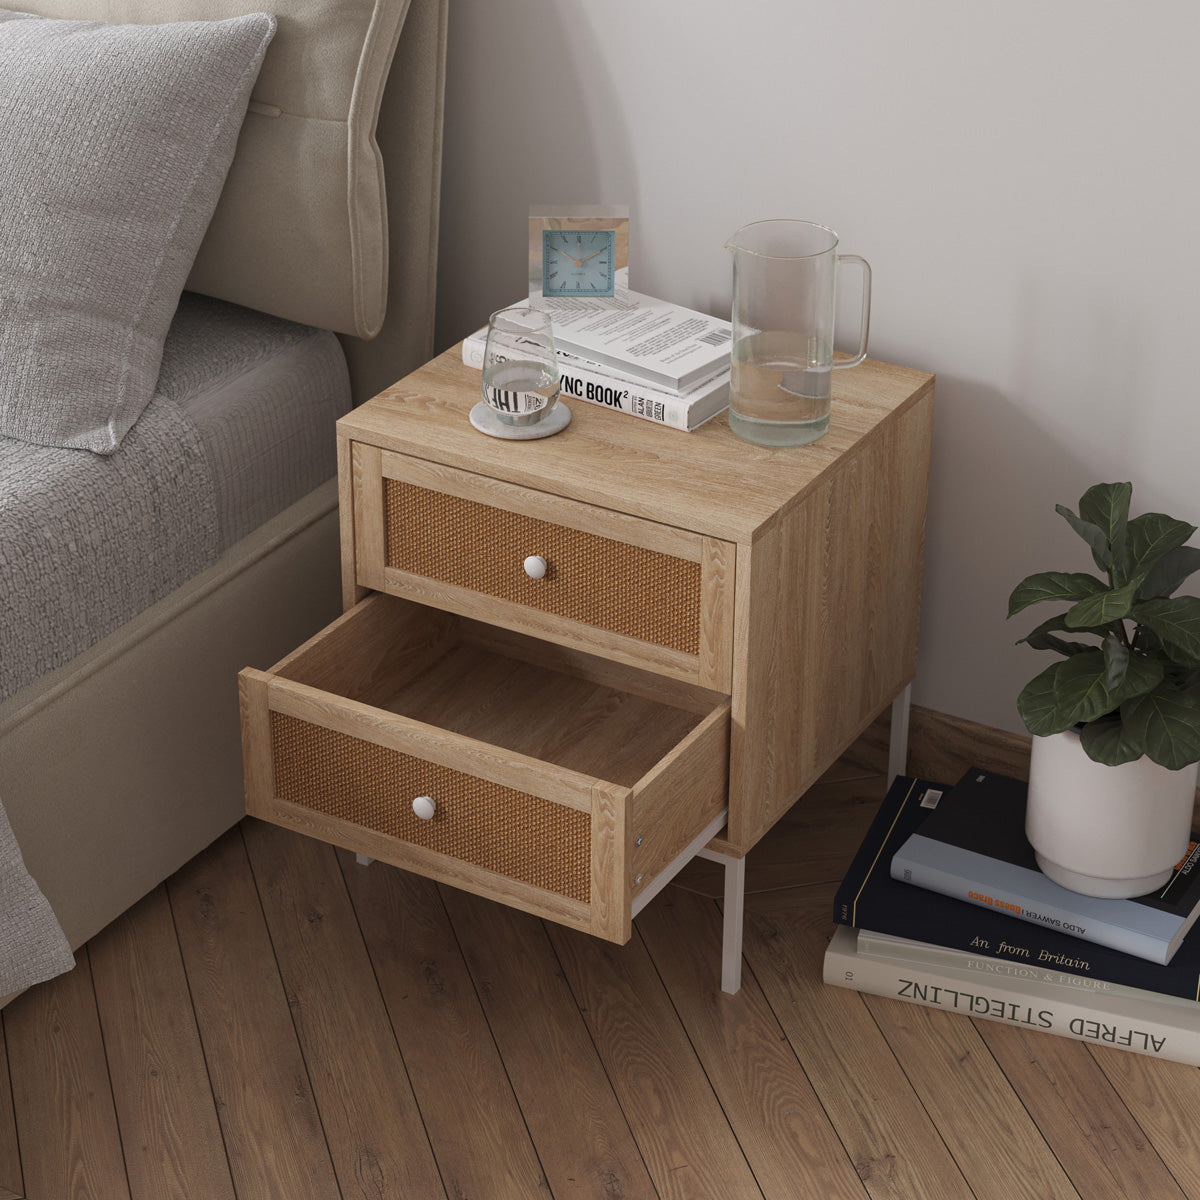 Rattan Cane Bedside Table with Drawers (Milo)